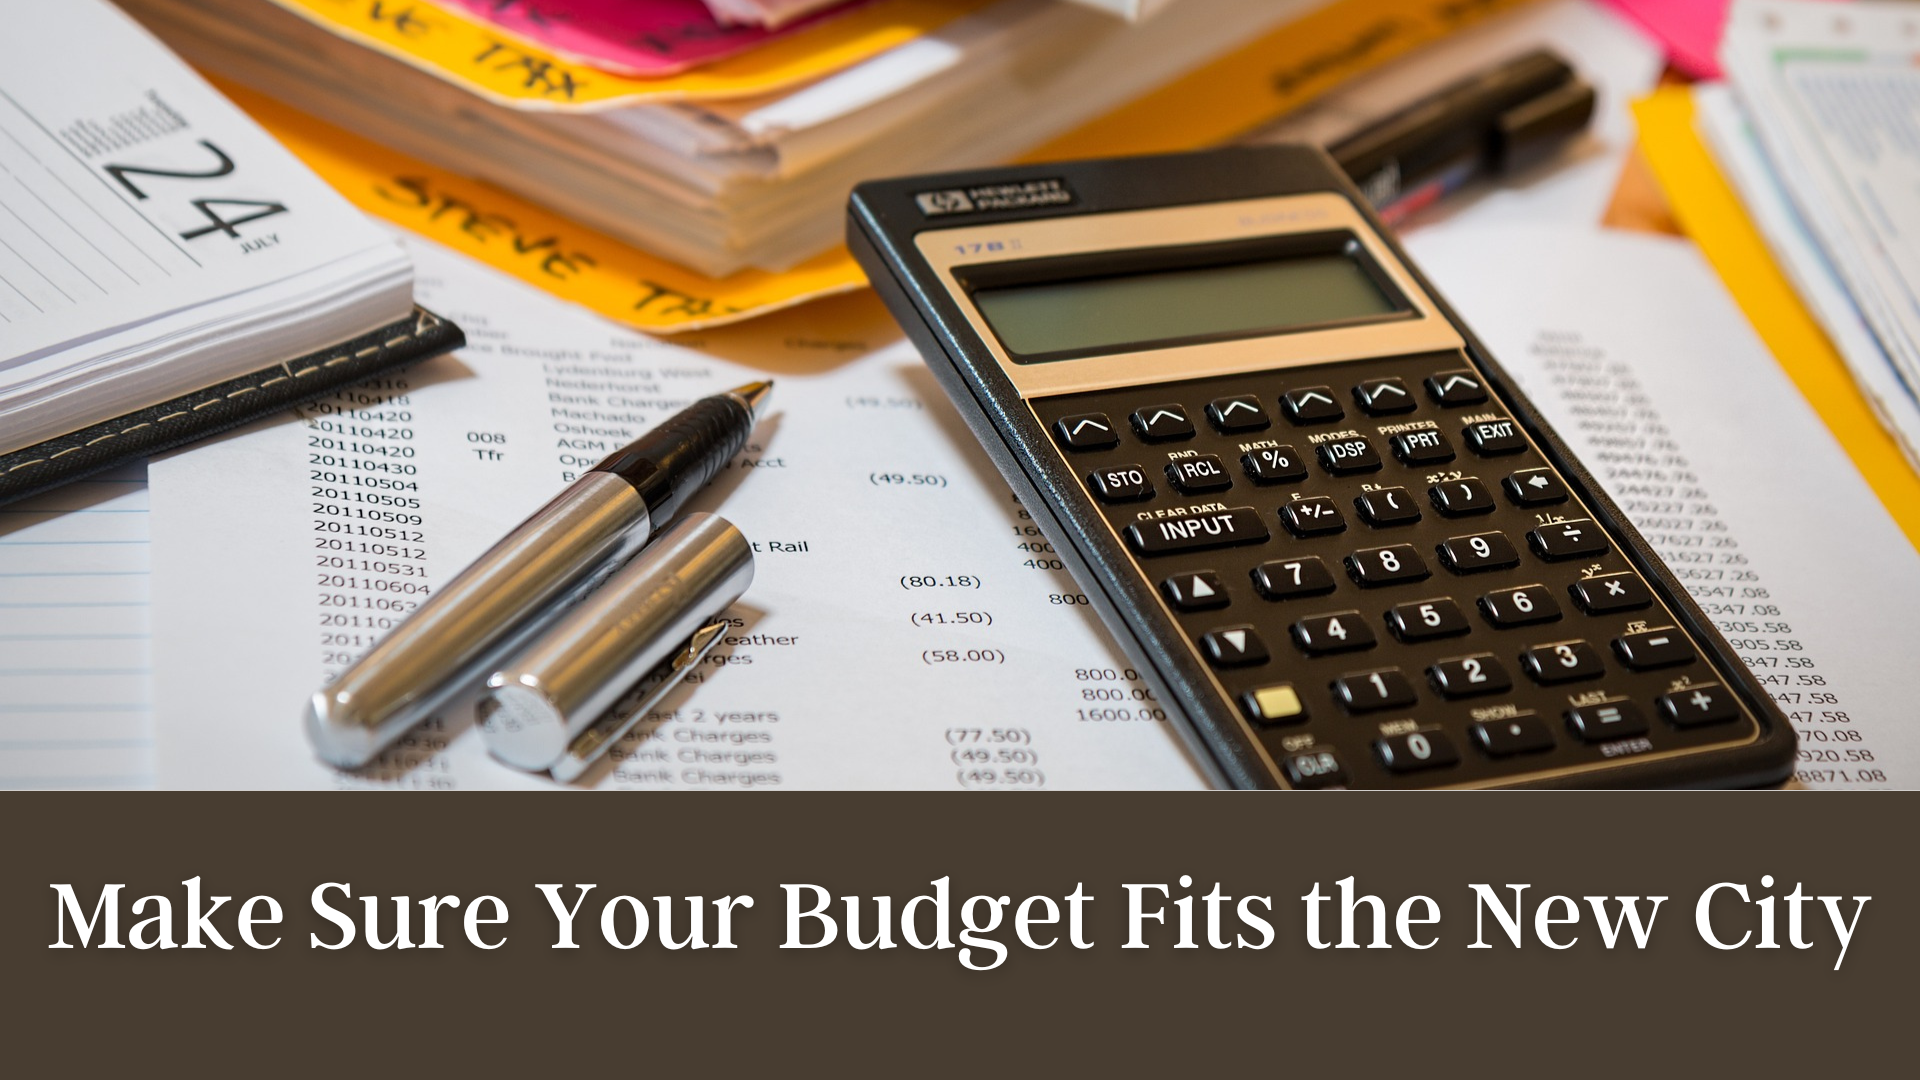 Make Sure Your Budget Fits the New City